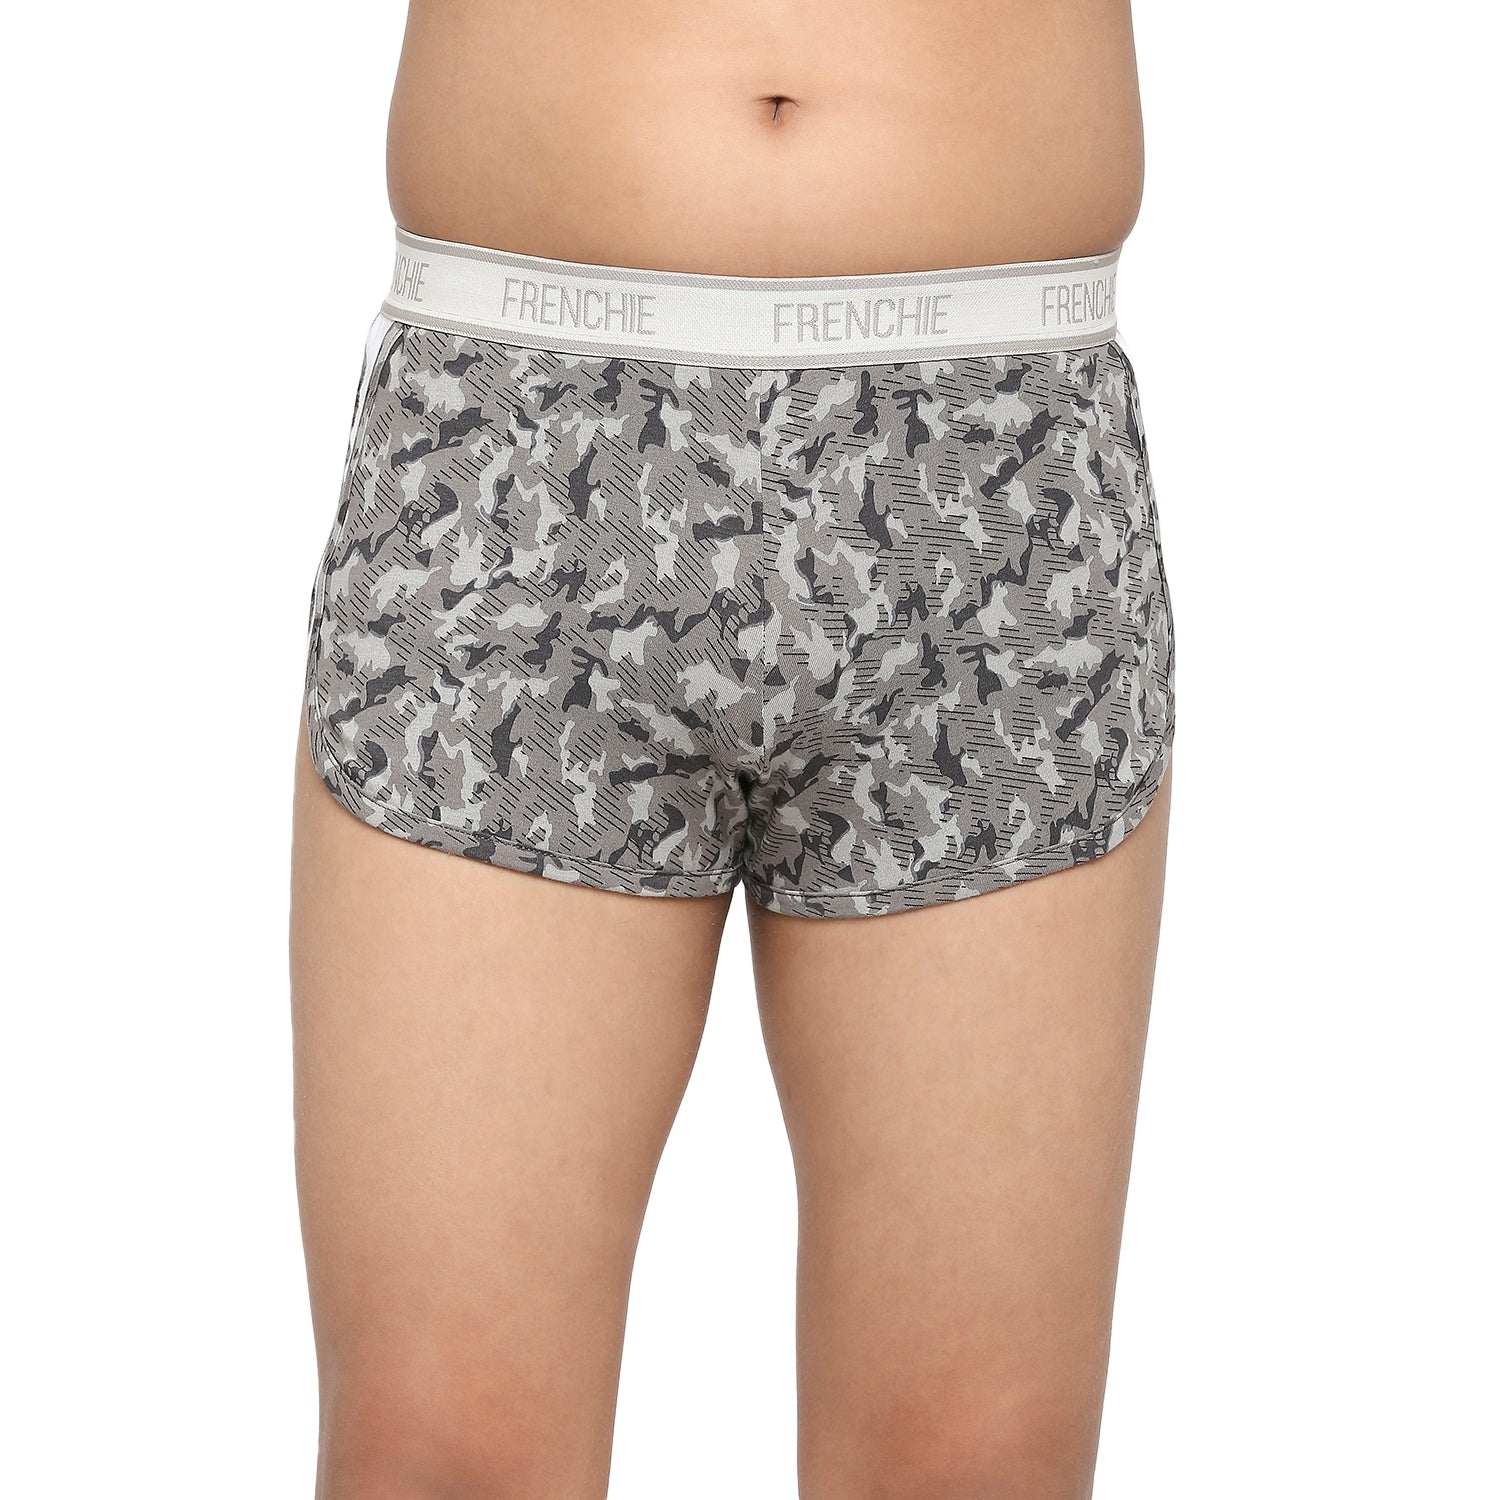 FRENCHIE Teenagers Cotton Trunk Gray and Light Gray - Pack of 2